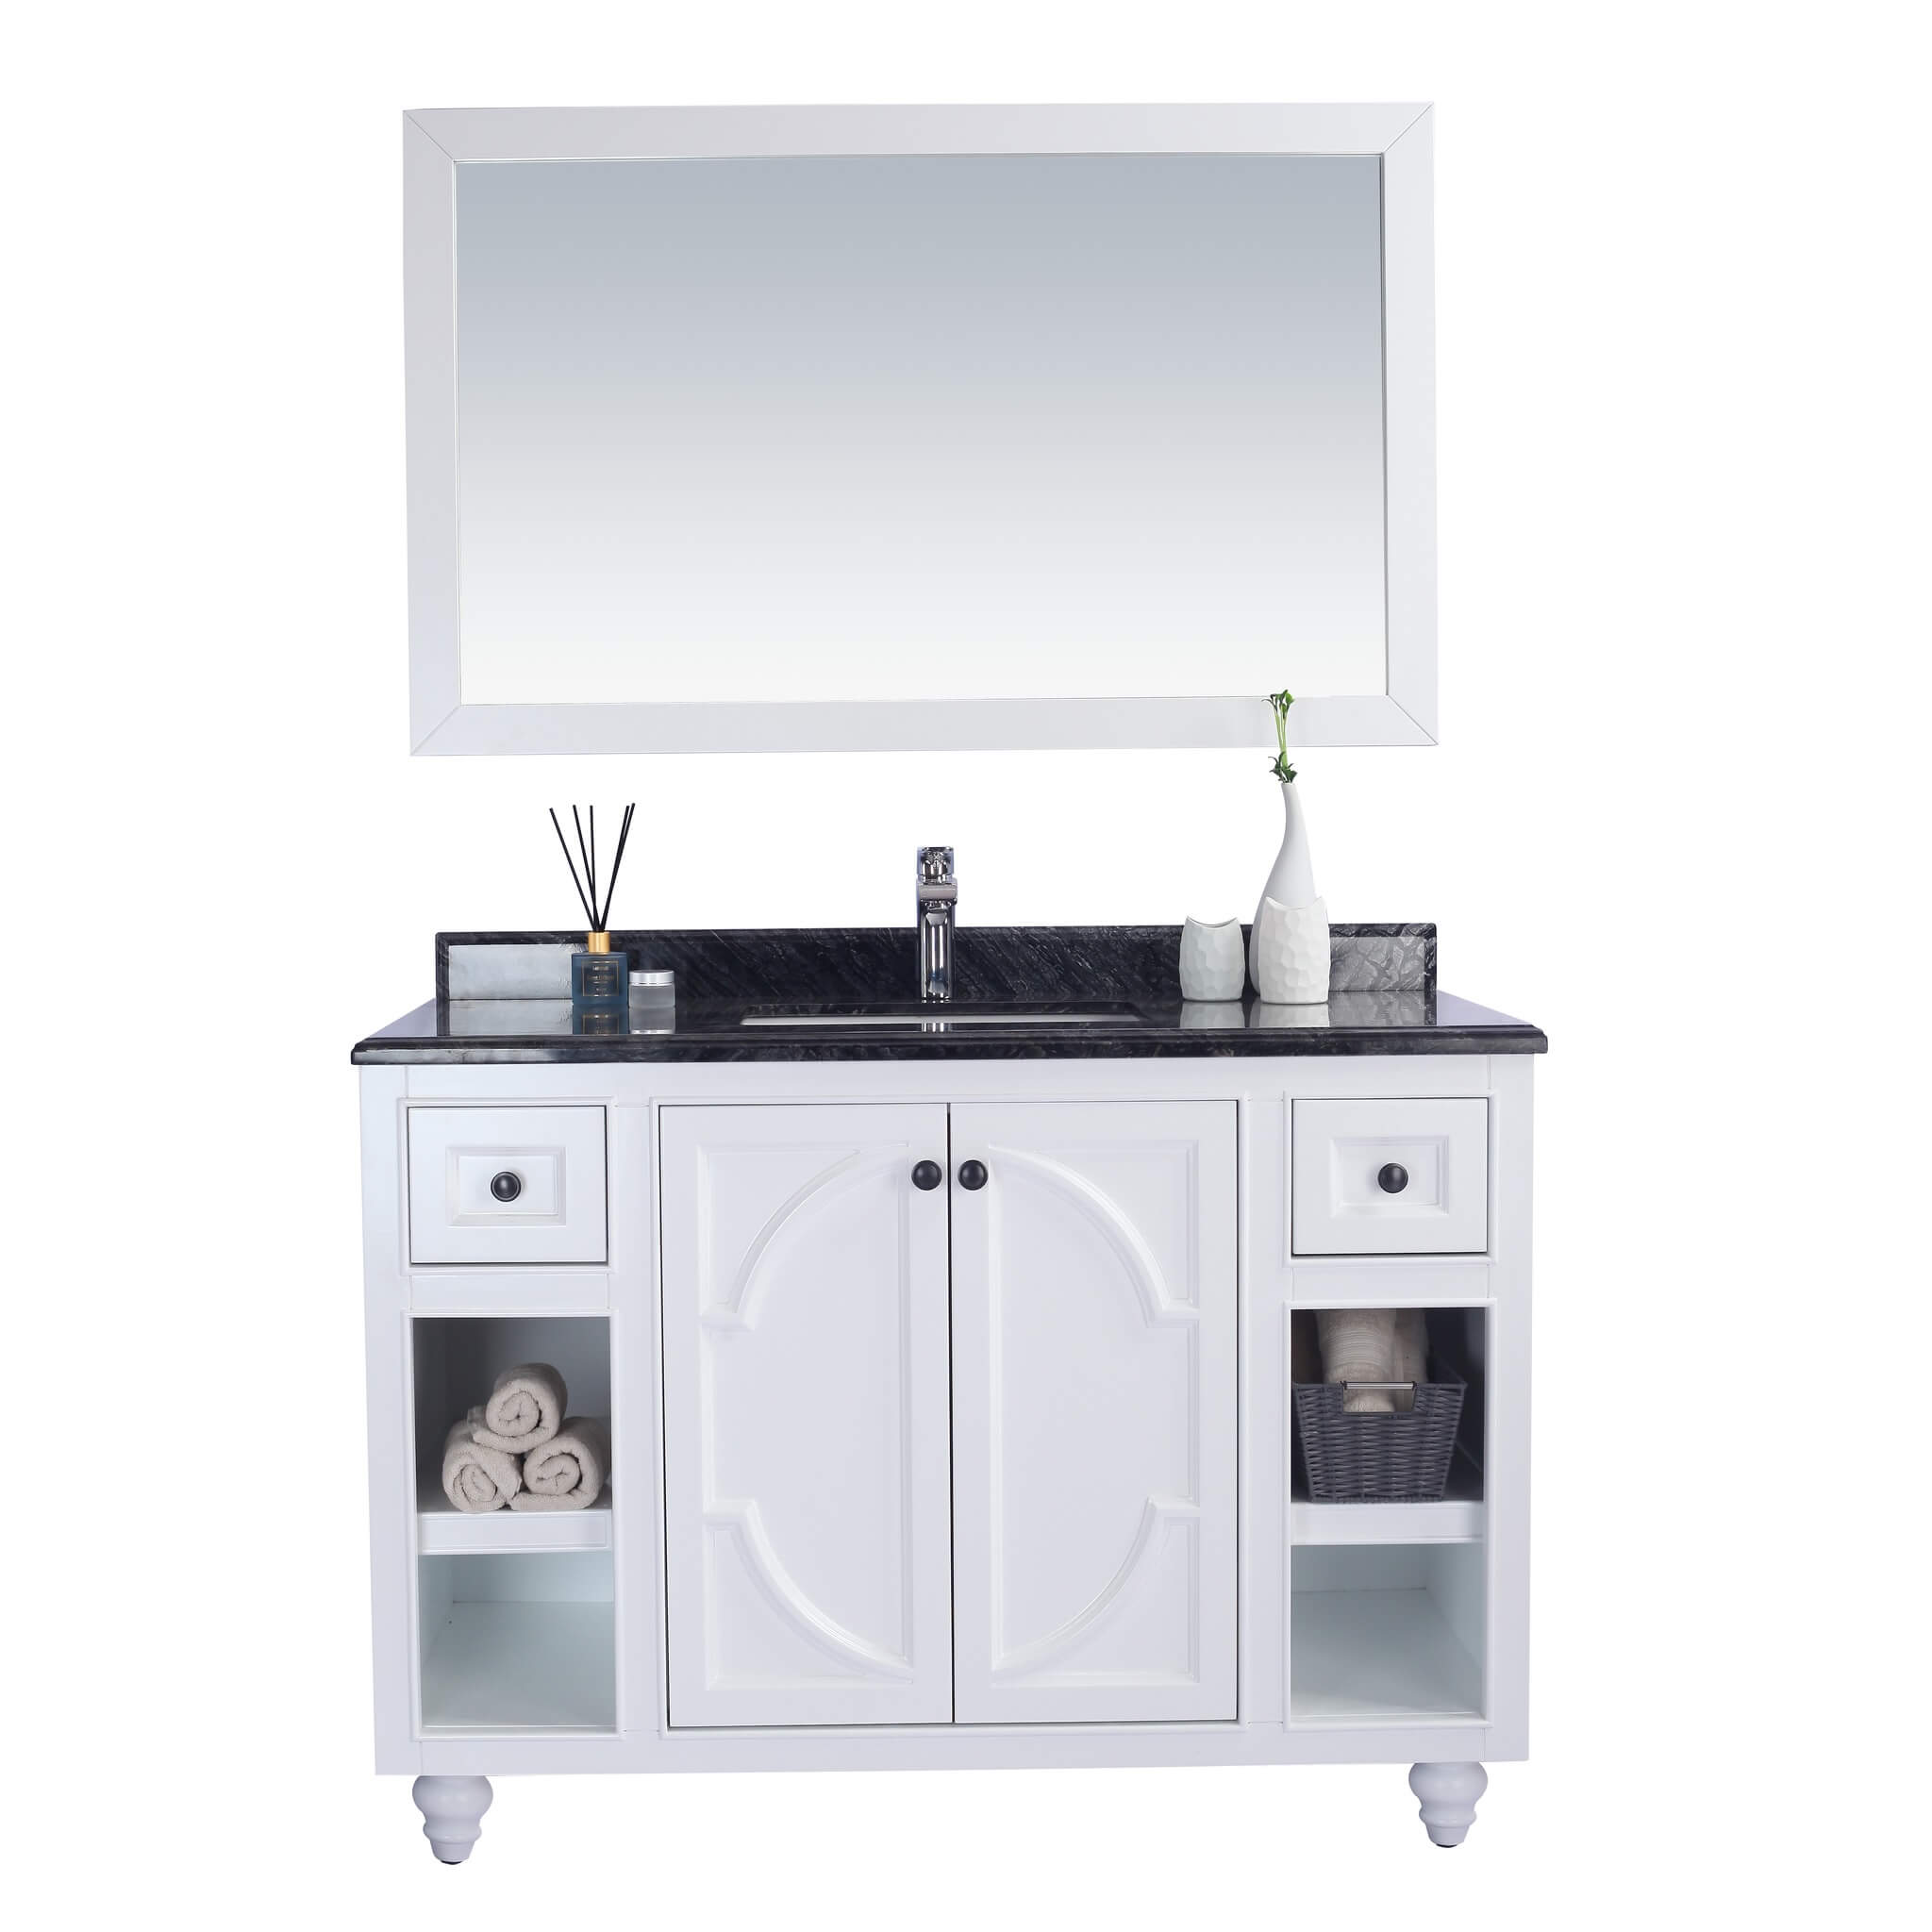 LAVIVA Odyssey 313613-48W-BW 48" Single Bathroom Vanity in White with Black Wood Marble, White Rectangle Sink, Front View